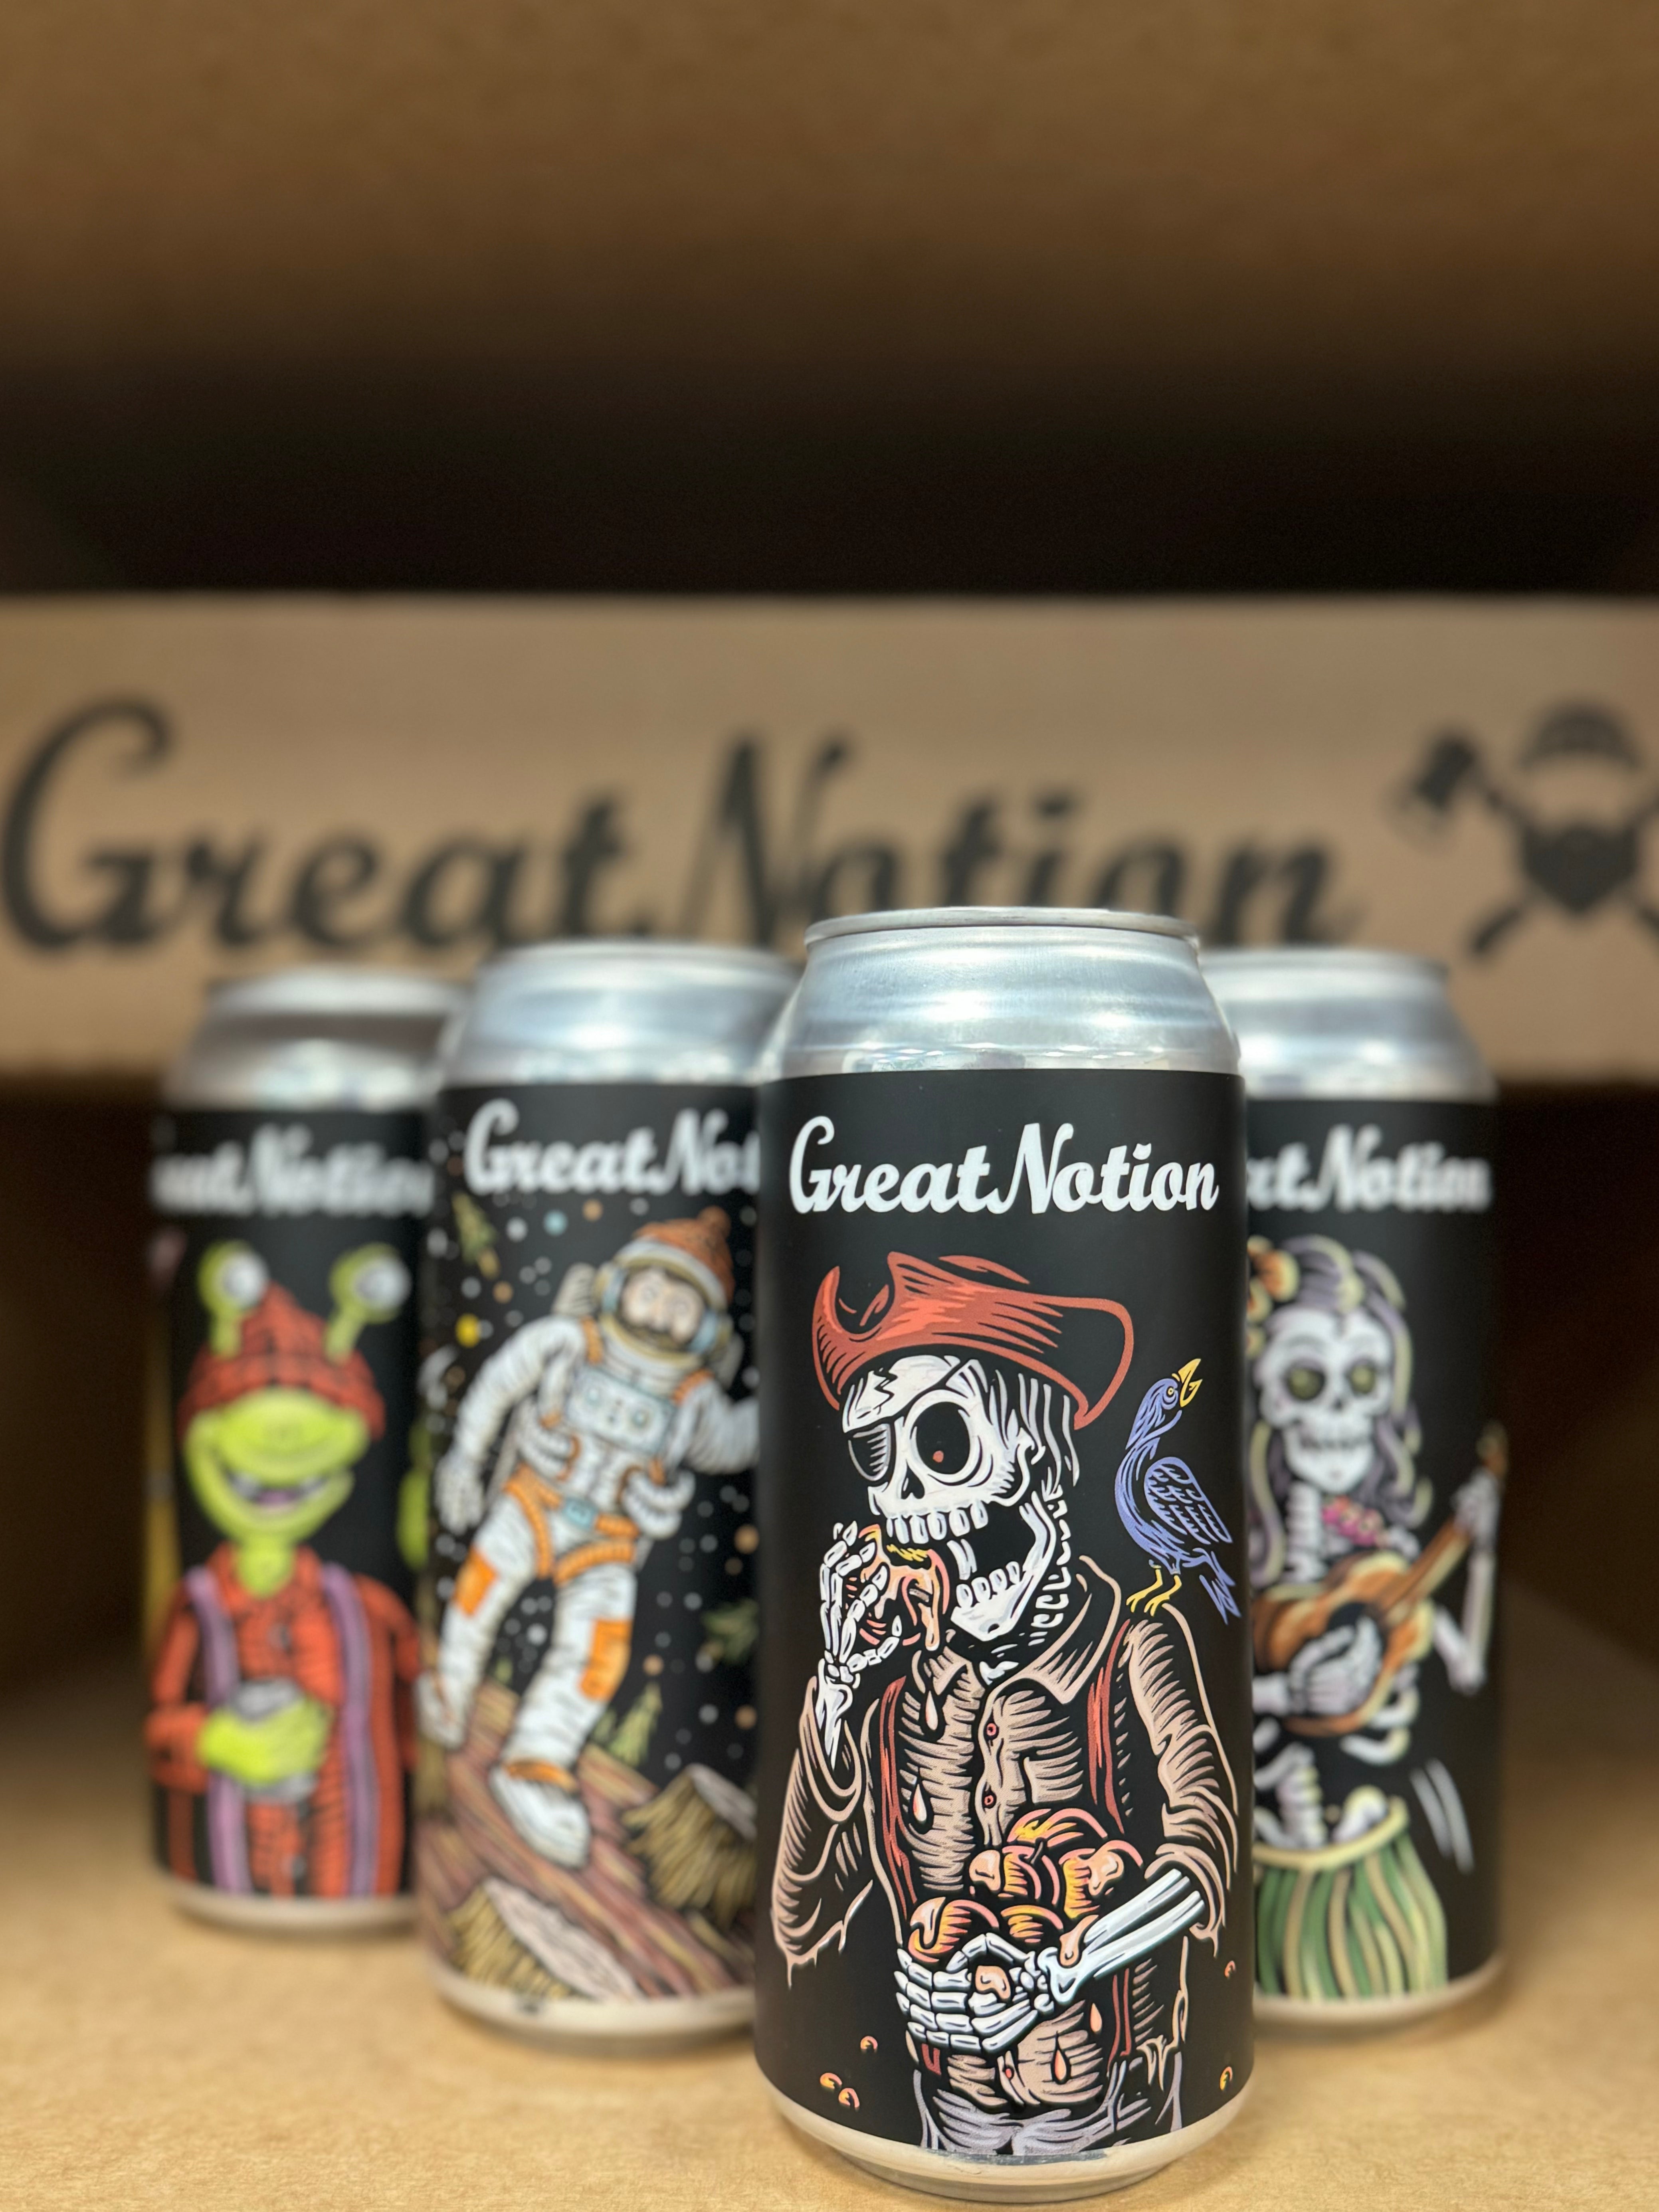 -Great Notion- Great Notion 🚀 Take Off Set 3-Packs & Cases- Only @ Beer Republic - The best online beer store for American & Canadian craft beer - Buy beer online from the USA and Canada - Bier online kopen - Amerikaans bier kopen - Craft beer store - Craft beer kopen - Amerikanisch bier kaufen - Bier online kaufen - Acheter biere online - IPA - Stout - Porter - New England IPA - Hazy IPA - Imperial Stout - Barrel Aged - Barrel Aged Imperial Stout - Brown - Dark beer - Blond - Blonde - Pilsner - Lager - Whe